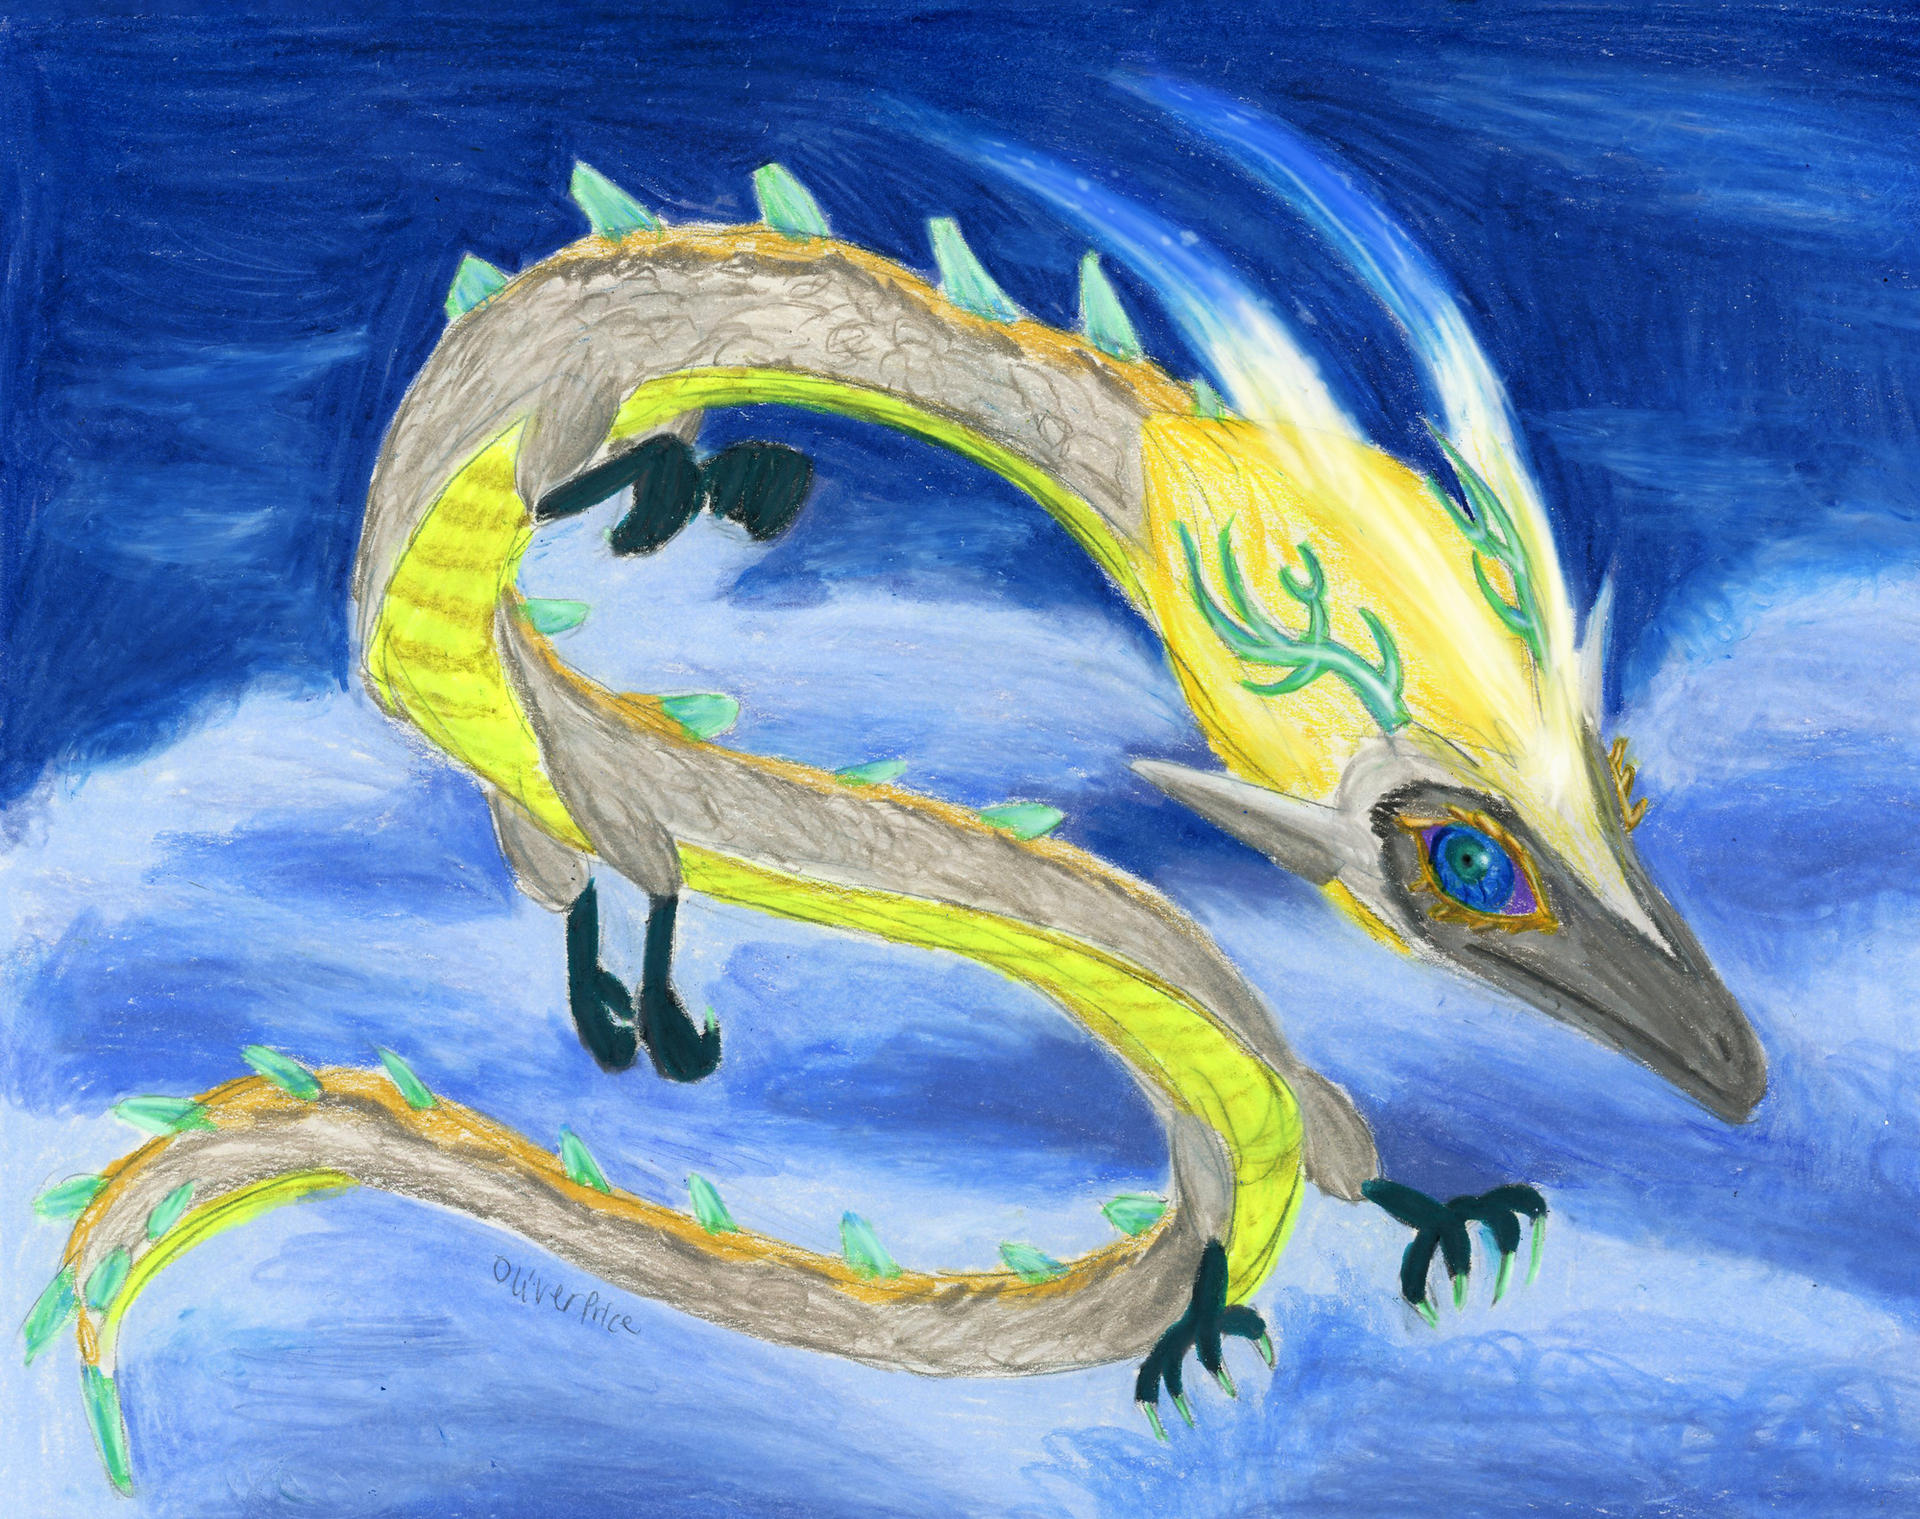 The dragons from Tears of the Kingdom by CeiliT on DeviantArt